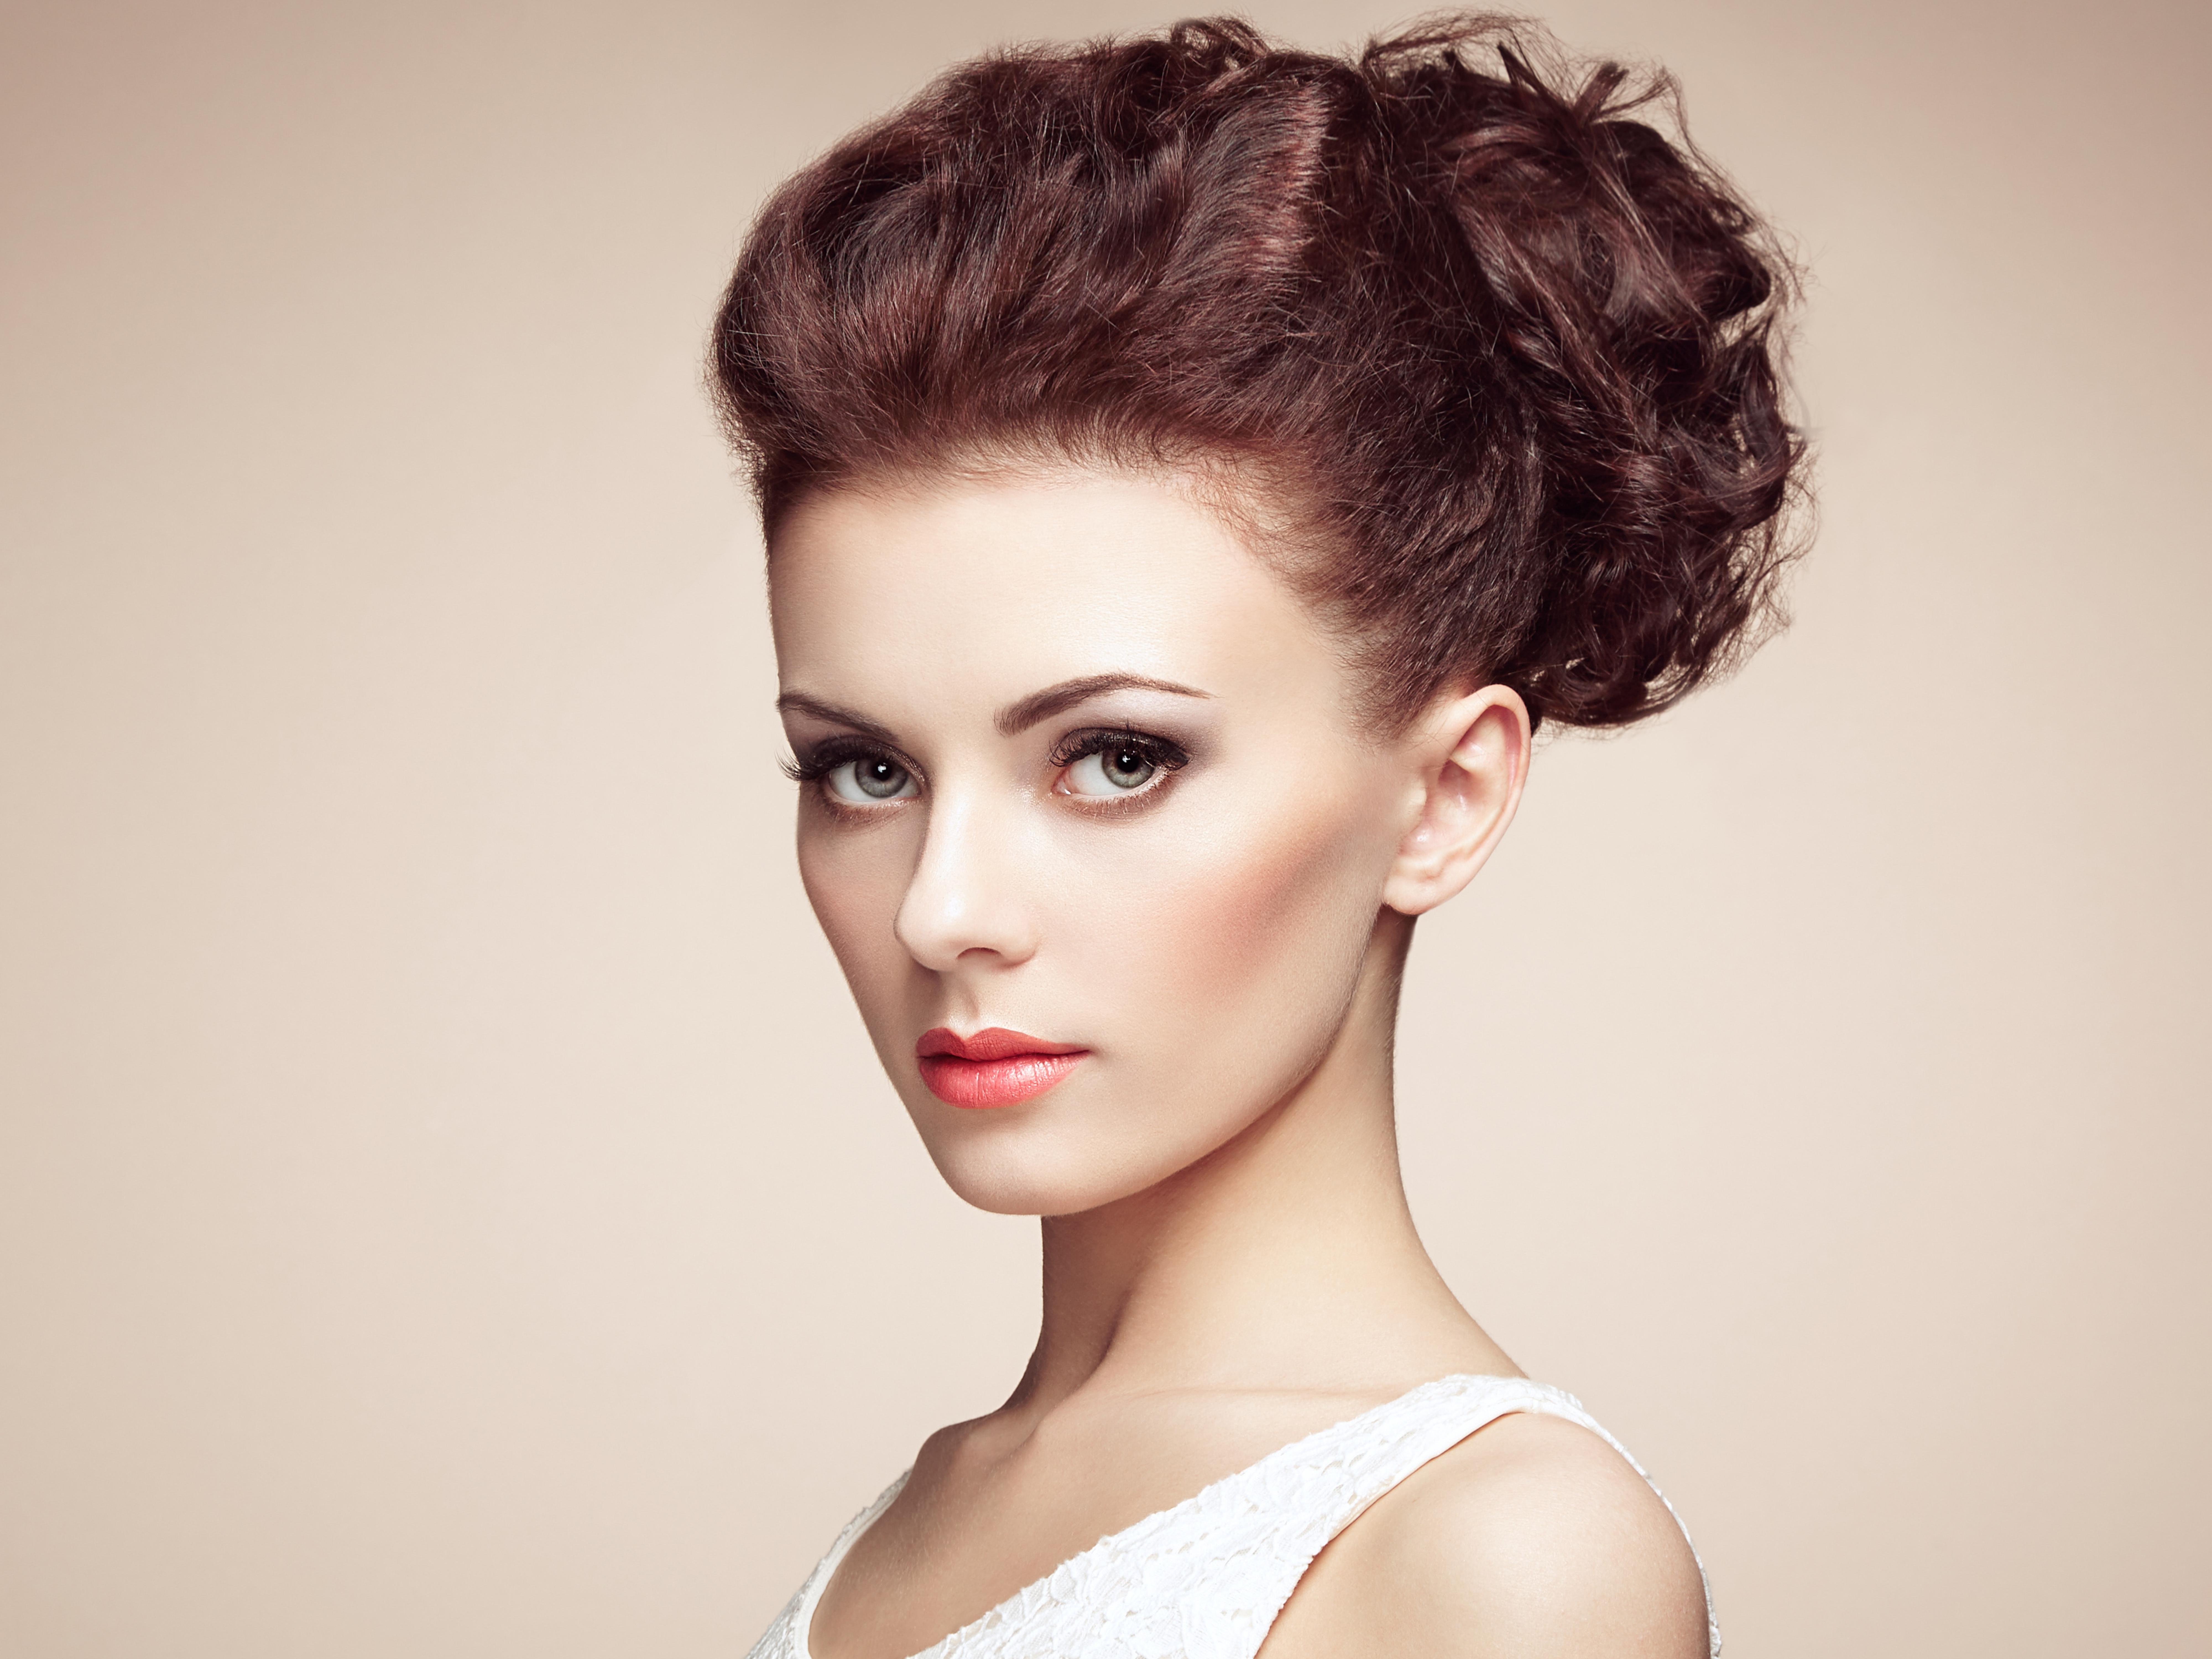 Portrait of beautiful sensual woman with elegant hairstyle 8k